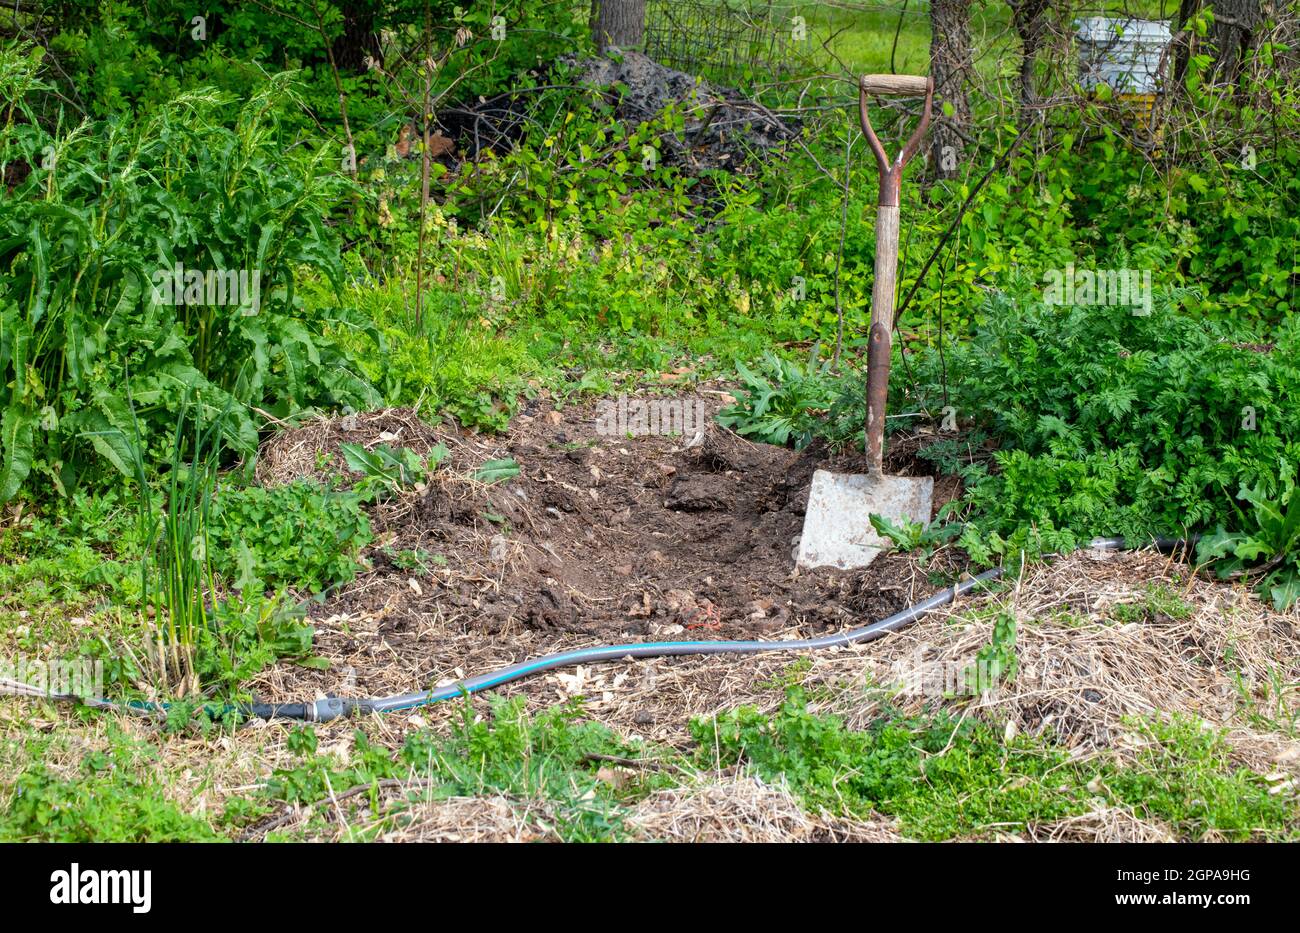 A shovel, a garden hose and a pile of dirt indicates that it might be gardening time in Missouri. Stock Photo